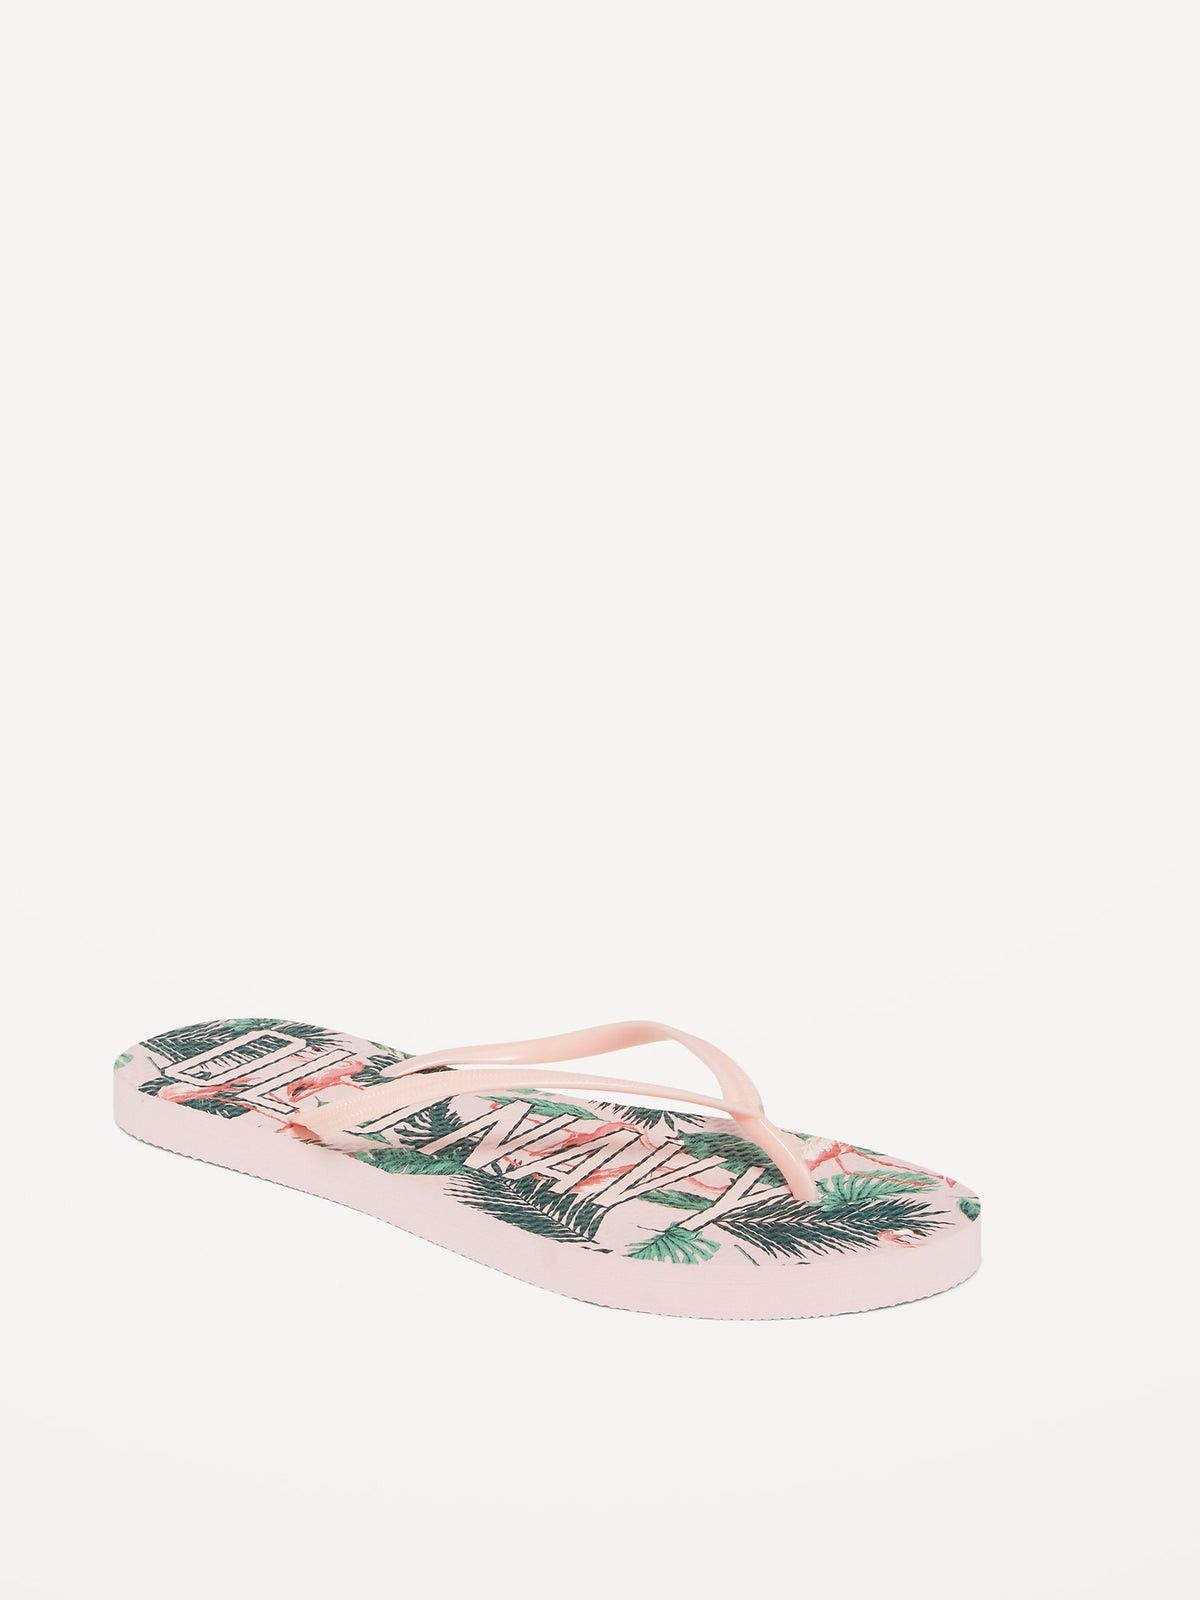 Flip-Flop Sandals for Women (Partially Plant-Based) - Old Navy Philippines